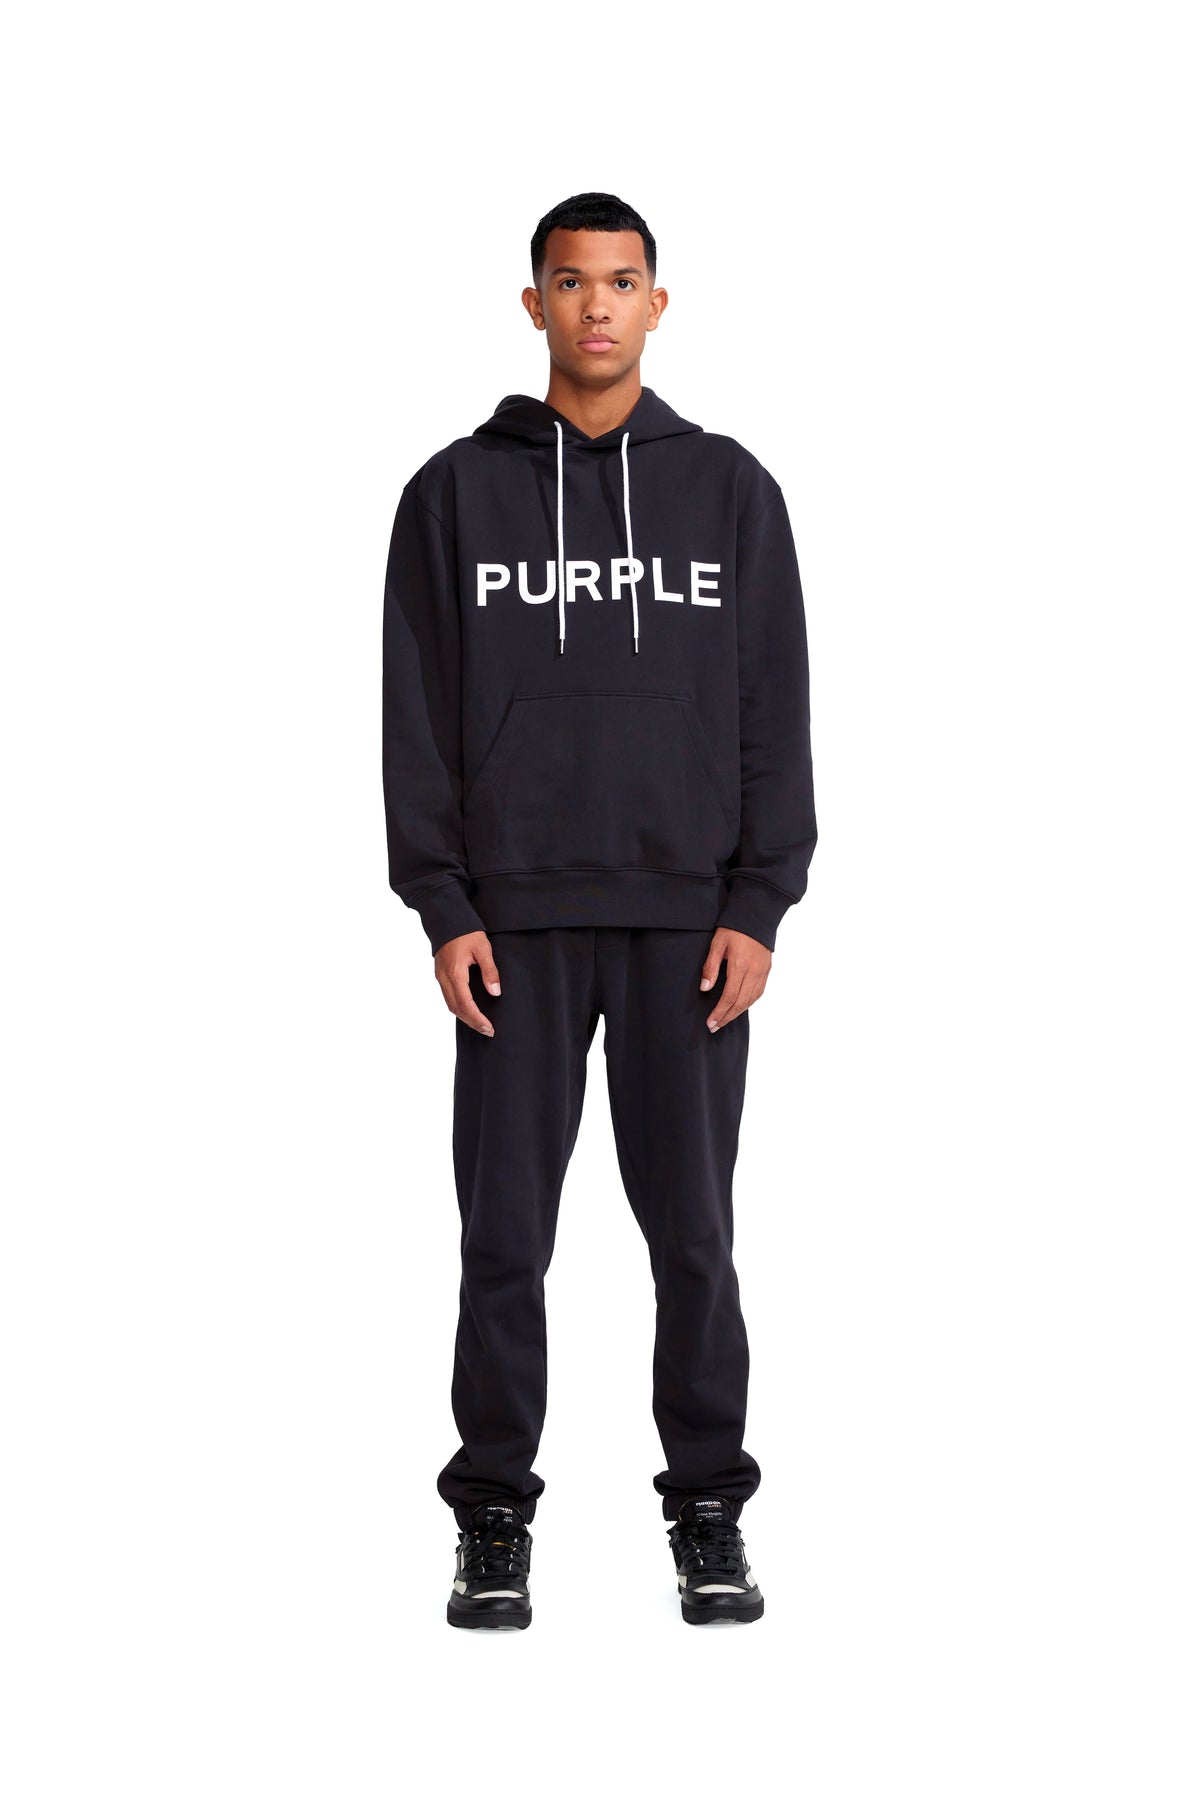 Purple Brand French Terry Sweatpant - CLASSIC BLACK BEAUTY